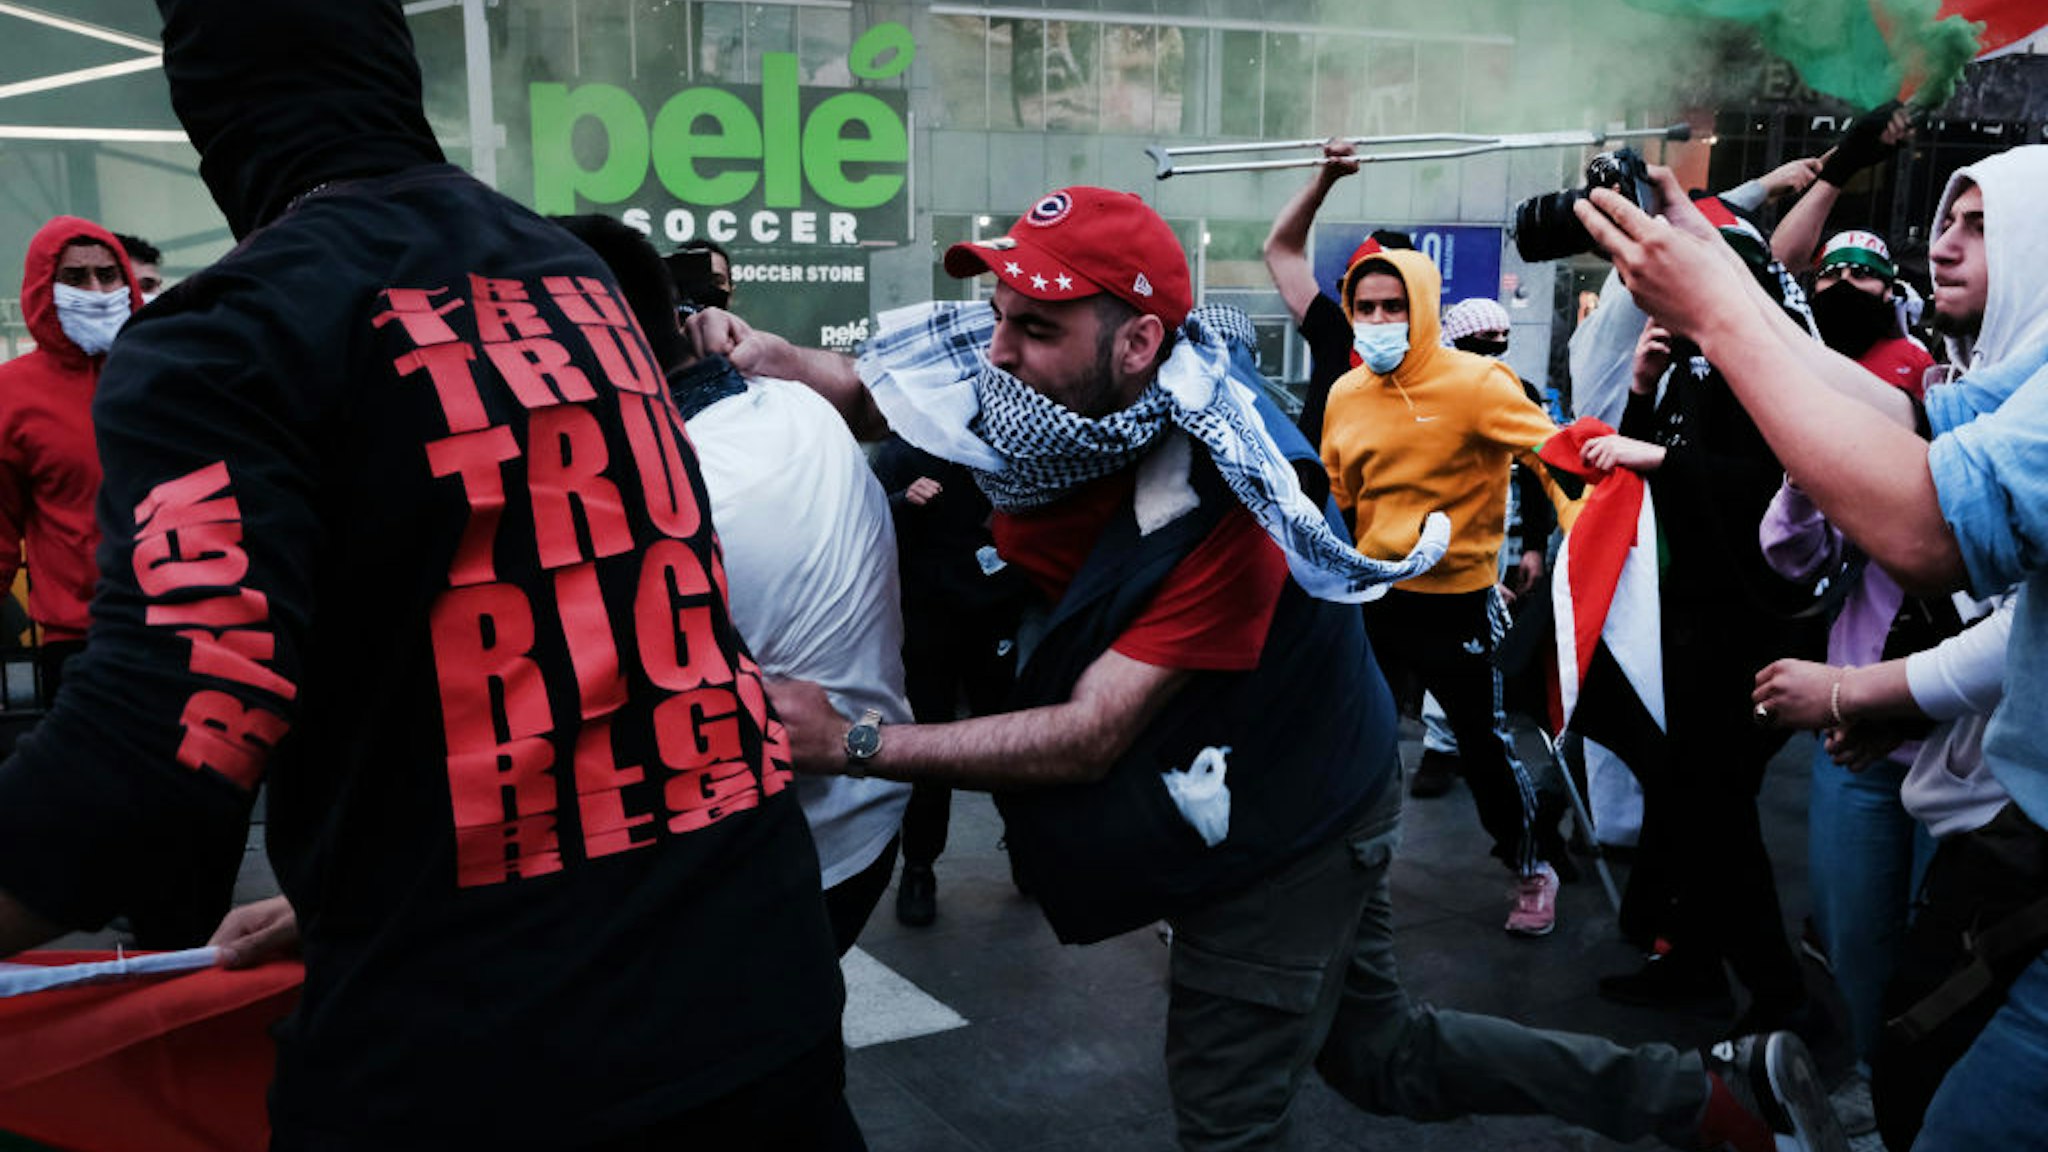 NEW YORK, NY - MAY 20: Pro Palestinian protesters face off with a group of Israel supporters and police in a violent clash in Times Square on May 20, 2021 in New York City. Despite an announcement of a cease fire between Israel and Gaza militants, dozens of supporters of both sides of the conflict fought in the streets of Times Square. Dozens were arrested and detained by police before they were dispersed out of the square. The 11 days of fighting has claimed the lives of at least 232 people in Gaza and 12 in Israel. (Photo by Spencer Platt/Getty Images)